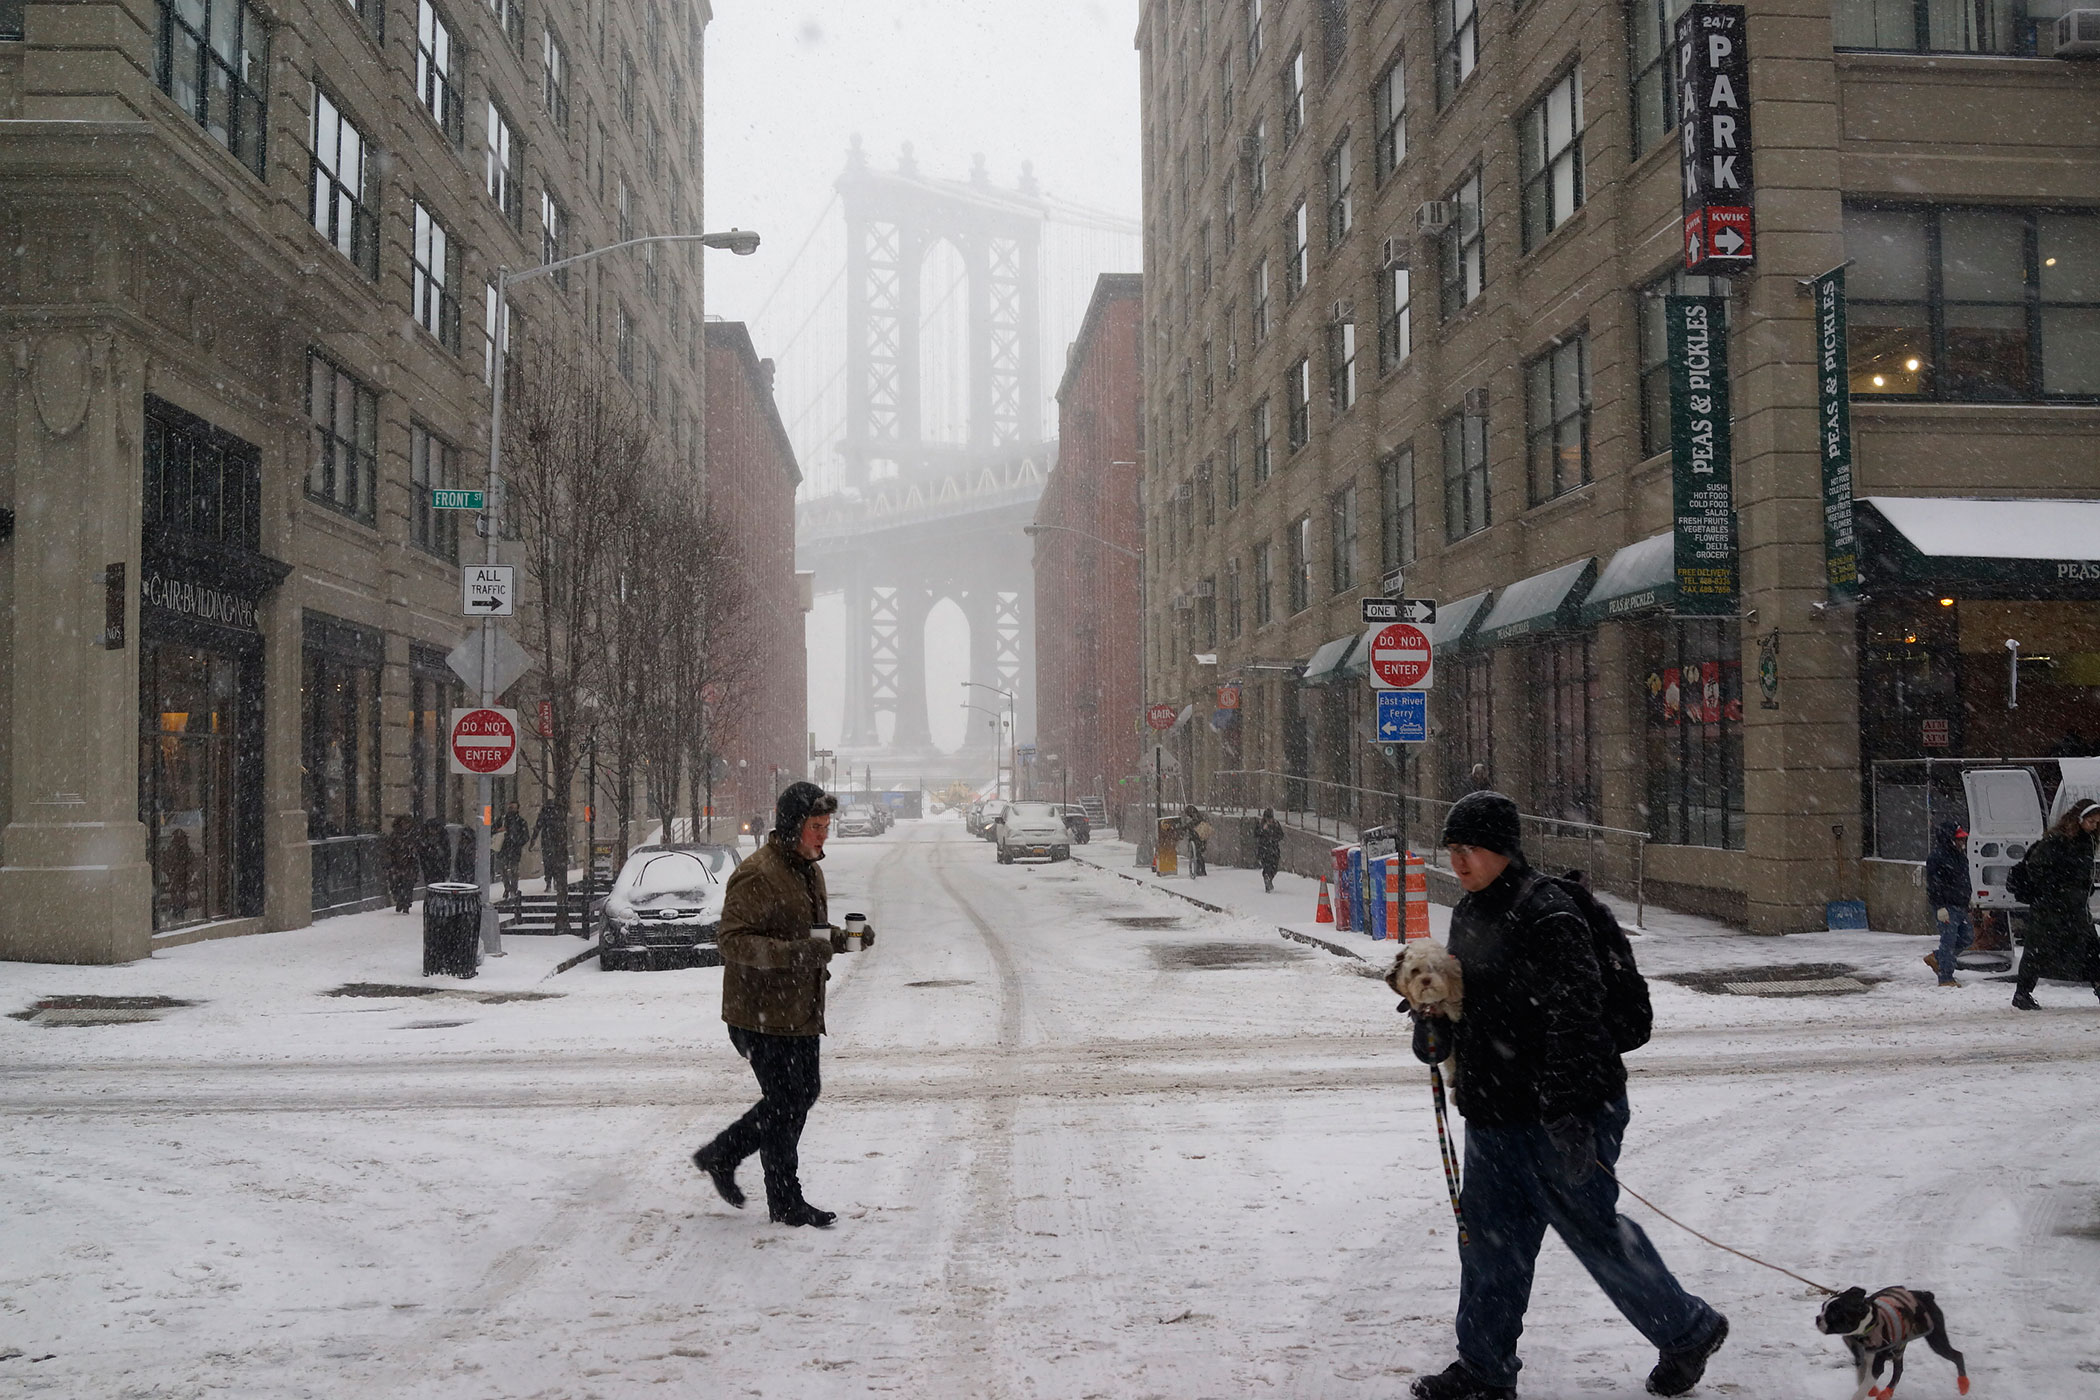 People walk in front of the Manhattan Bridge in the DUMBO neighborhood as it snows in Brooklyn, NY on Jan. 26, 2015Photograph by Andrew Hinderaker